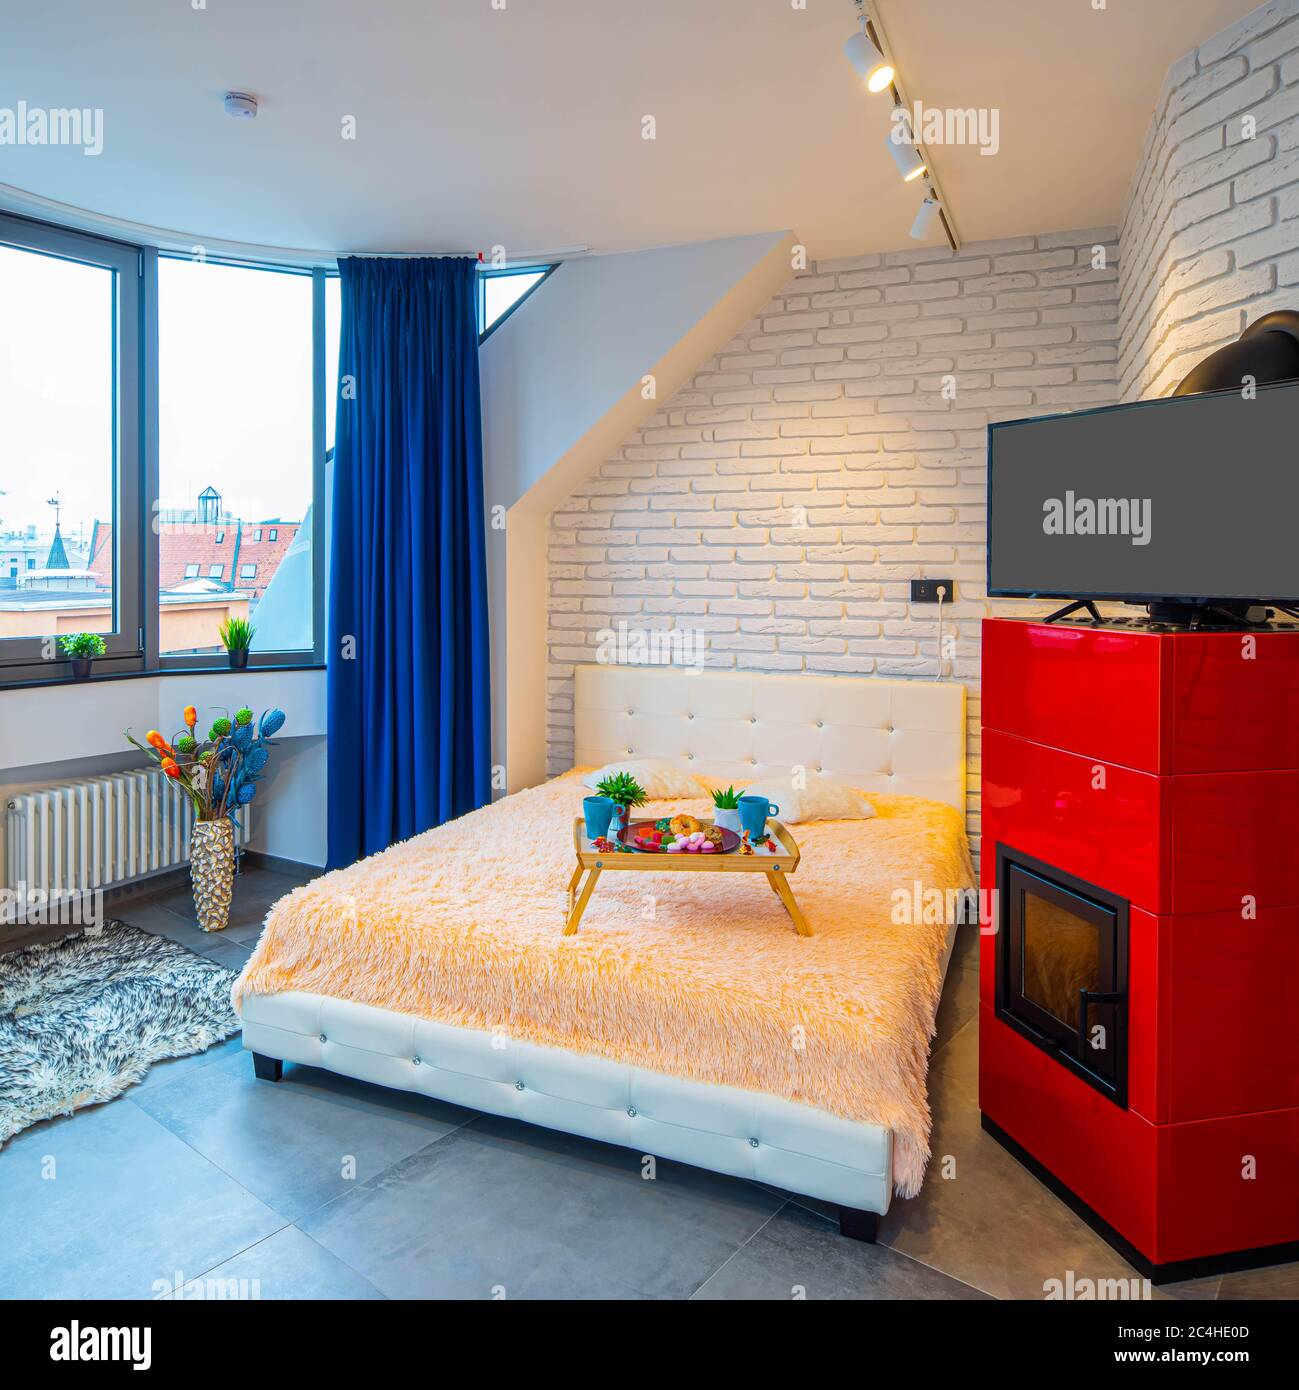 Modern loft interior of luxury studio apartment. Brick wall. Panorama window. Tray with food on the bed. TV on the fireplace. Stock Photo